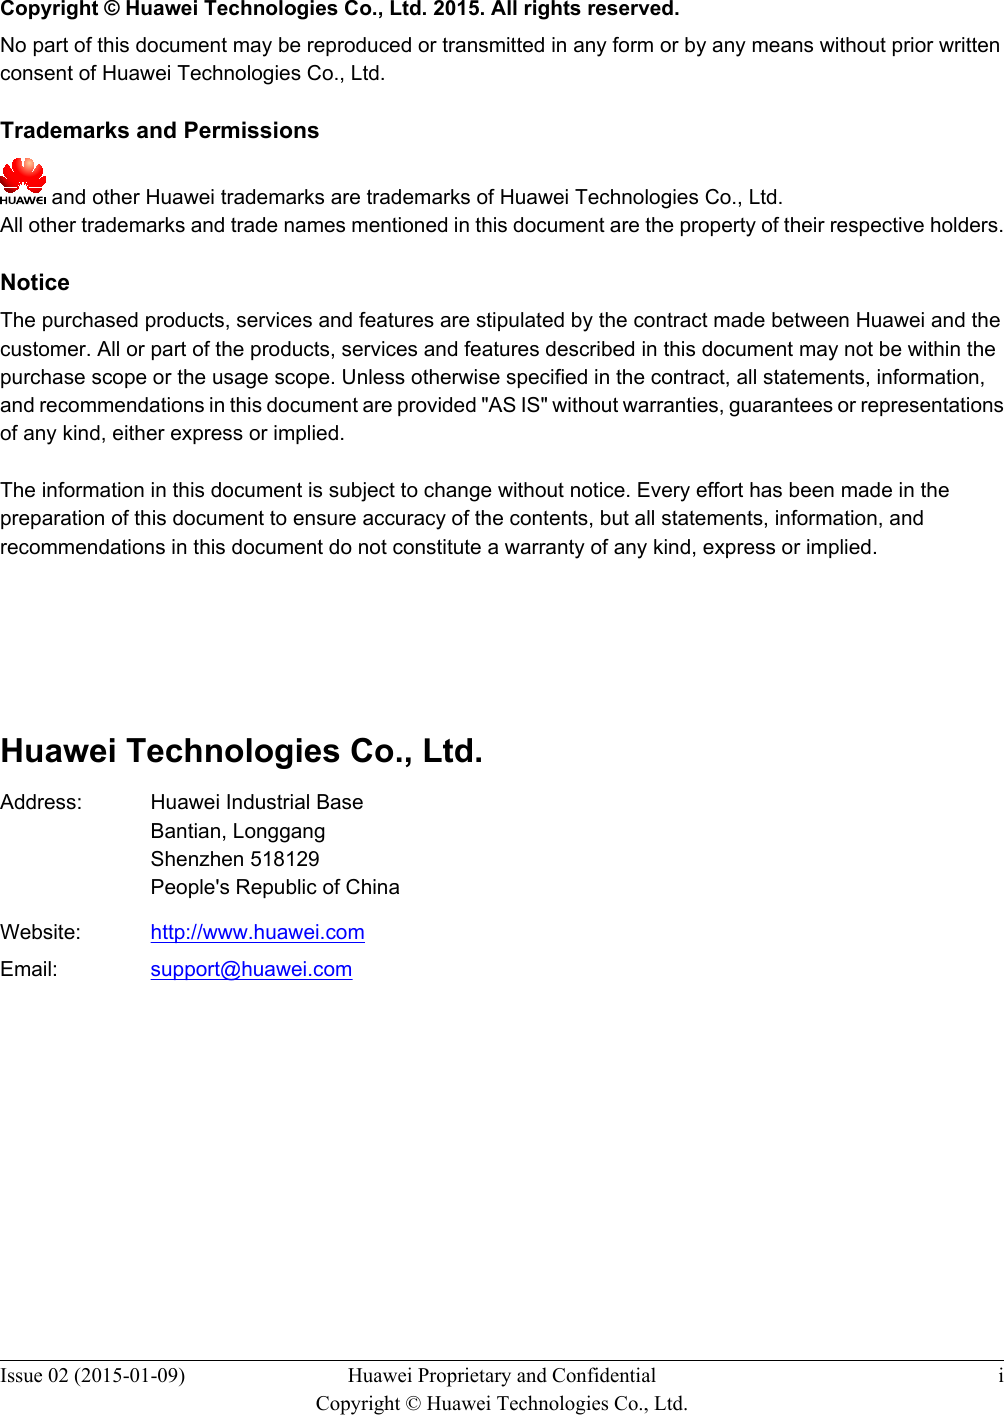   Copyright © Huawei Technologies Co., Ltd. 2015. All rights reserved.No part of this document may be reproduced or transmitted in any form or by any means without prior writtenconsent of Huawei Technologies Co., Ltd. Trademarks and Permissions and other Huawei trademarks are trademarks of Huawei Technologies Co., Ltd.All other trademarks and trade names mentioned in this document are the property of their respective holders. NoticeThe purchased products, services and features are stipulated by the contract made between Huawei and thecustomer. All or part of the products, services and features described in this document may not be within thepurchase scope or the usage scope. Unless otherwise specified in the contract, all statements, information,and recommendations in this document are provided &quot;AS IS&quot; without warranties, guarantees or representationsof any kind, either express or implied.The information in this document is subject to change without notice. Every effort has been made in thepreparation of this document to ensure accuracy of the contents, but all statements, information, andrecommendations in this document do not constitute a warranty of any kind, express or implied.       Huawei Technologies Co., Ltd.Address: Huawei Industrial BaseBantian, LonggangShenzhen 518129People&apos;s Republic of ChinaWebsite: http://www.huawei.comEmail: support@huawei.comIssue 02 (2015-01-09) Huawei Proprietary and ConfidentialCopyright © Huawei Technologies Co., Ltd.i